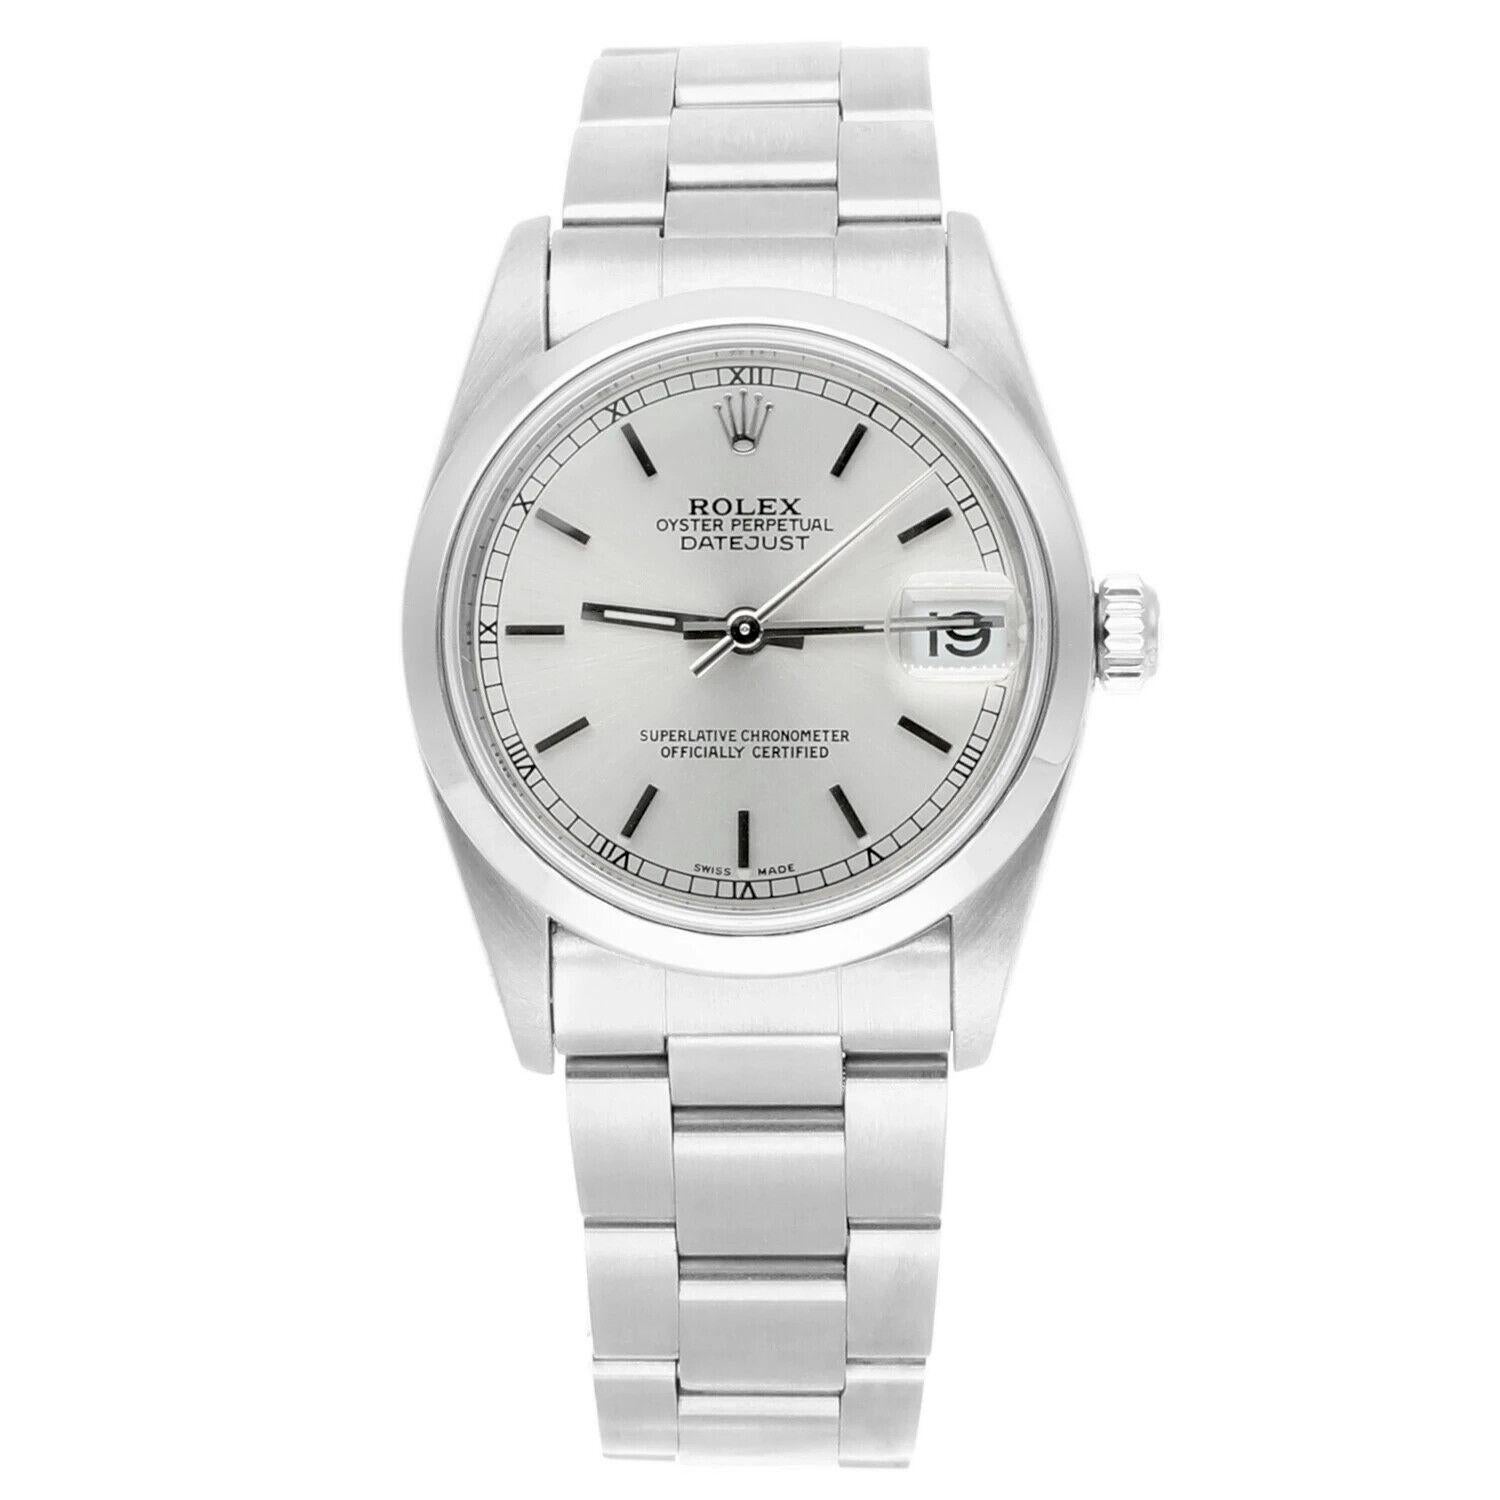 Silver-tone stainless steel case with a silver-tone stainless steel oyster bracelet. Fixed silver-tone stainless steel bezel. Silver-tone dial with silver-tone hands and index hour markers. Minute markers around the outer rim. Dial Type: Analog.